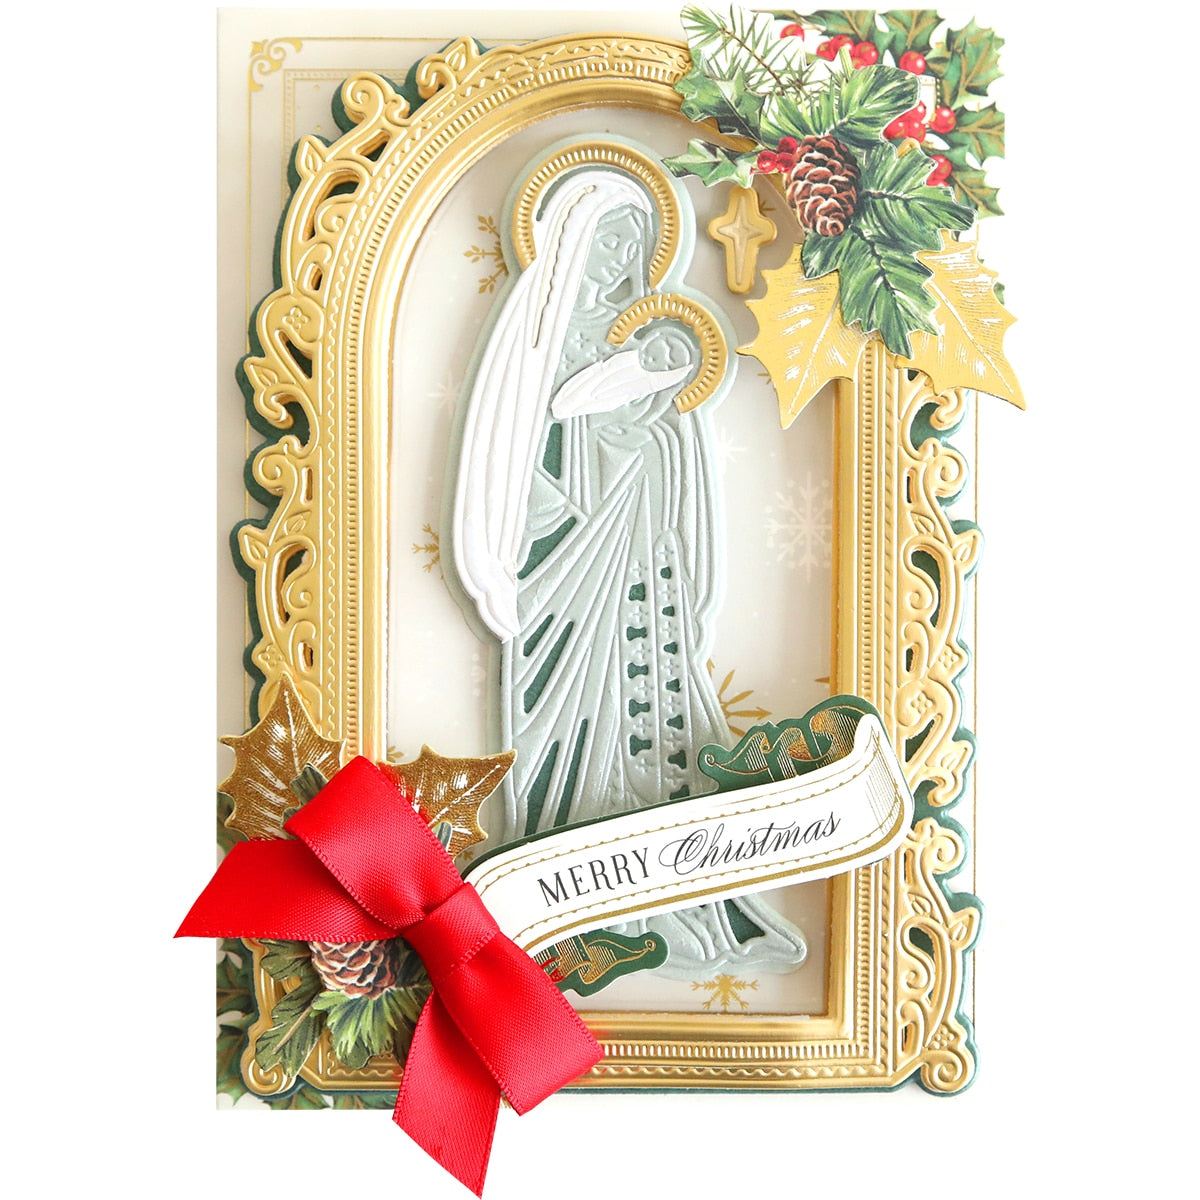 A Christmas card with an image of the Madonna & Child Die Set.